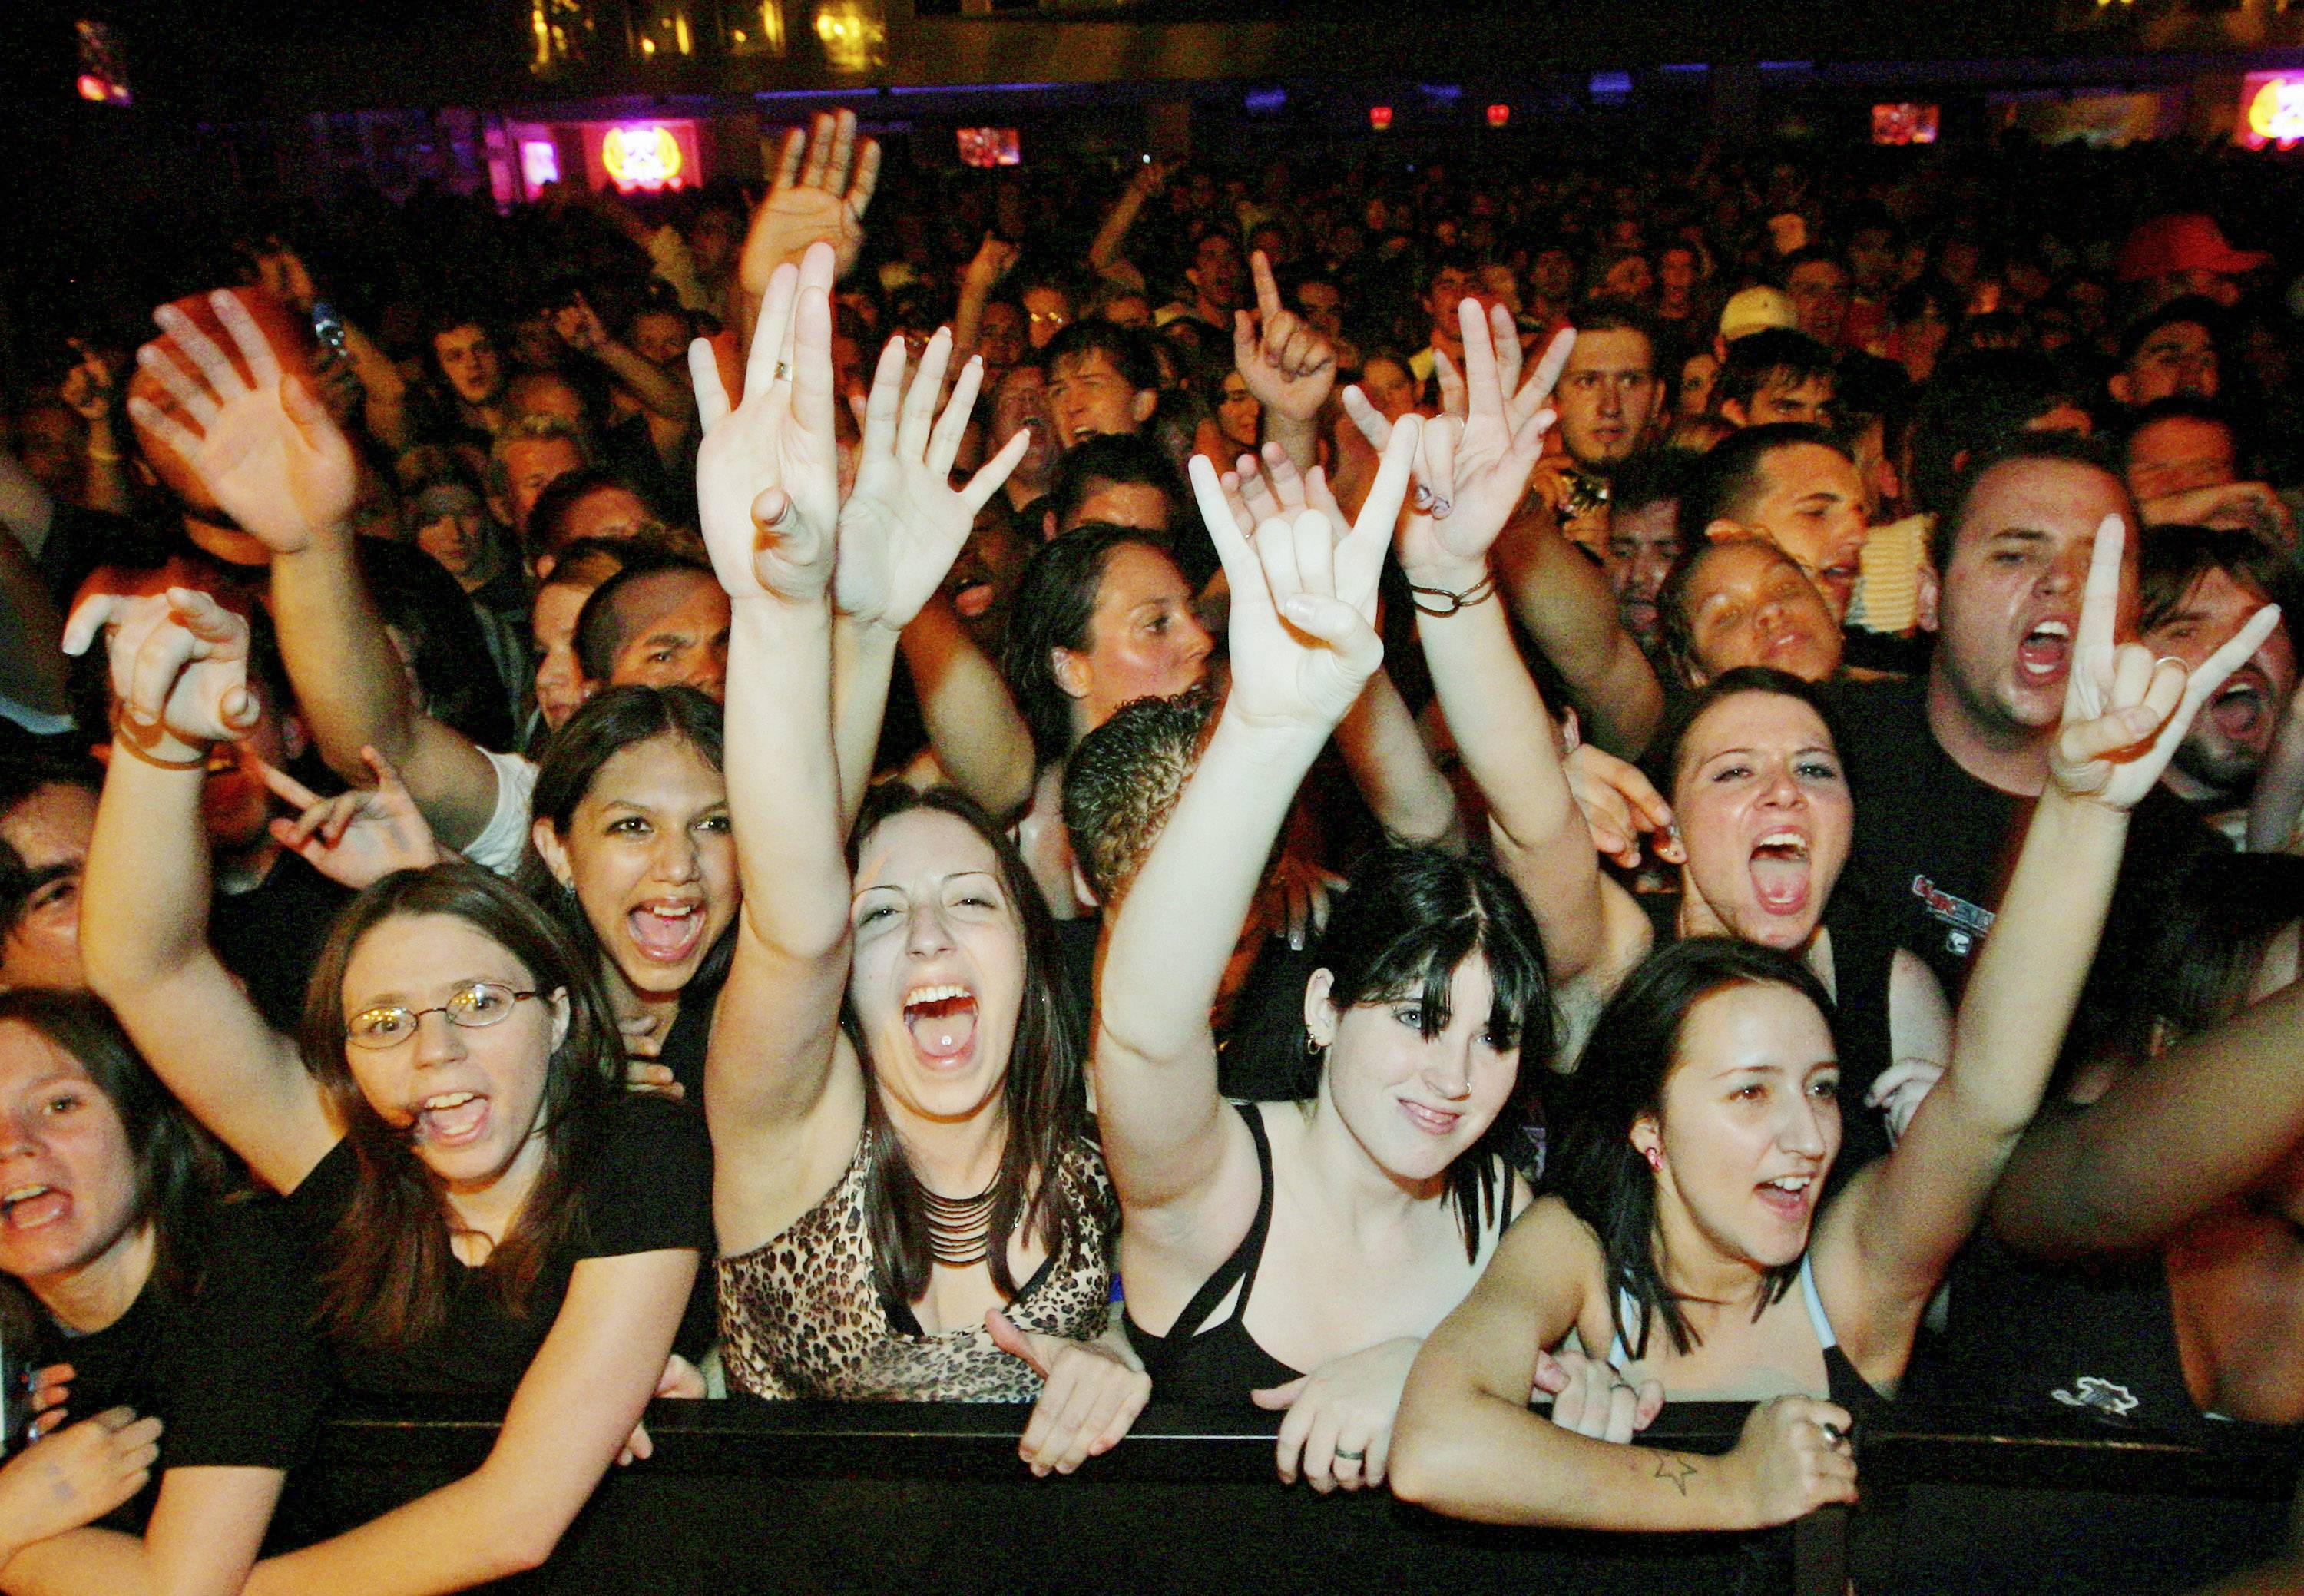 LAS VEGAS - AUGUST 05:  Fans react as Papa Roach performs at The Joint inside the Hard Rock Hotel & Casino August 5, 2005 in Las Vegas, Nevada. The rock group is touring in support of the platinum-selling album "Getting Away With Murder."  (Photo by Ethan Miller/Getty Images)